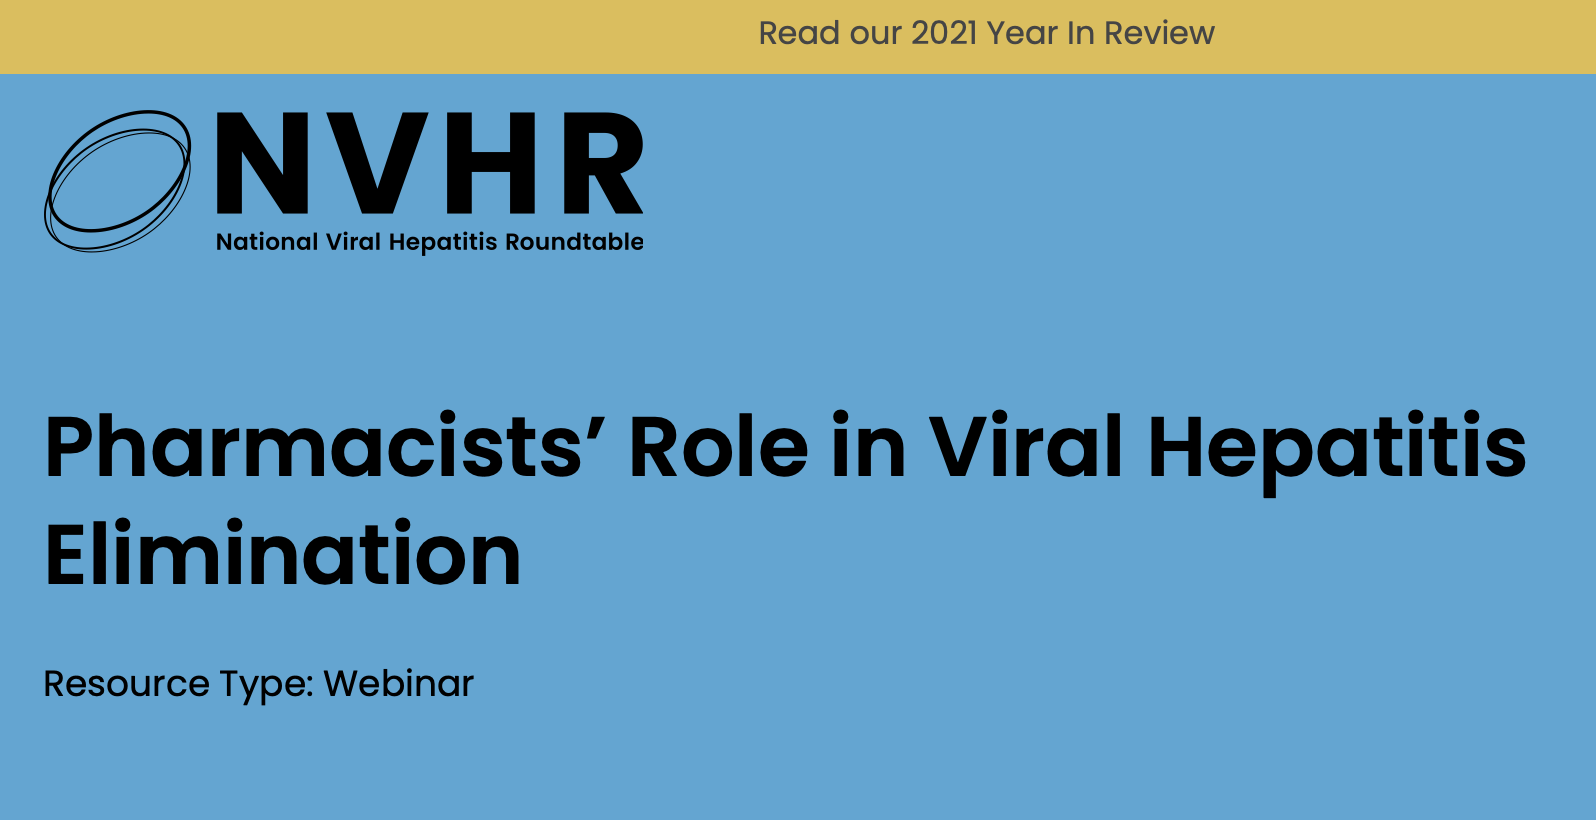 Pharmacists’ Role in Viral Hepatitis Elimination